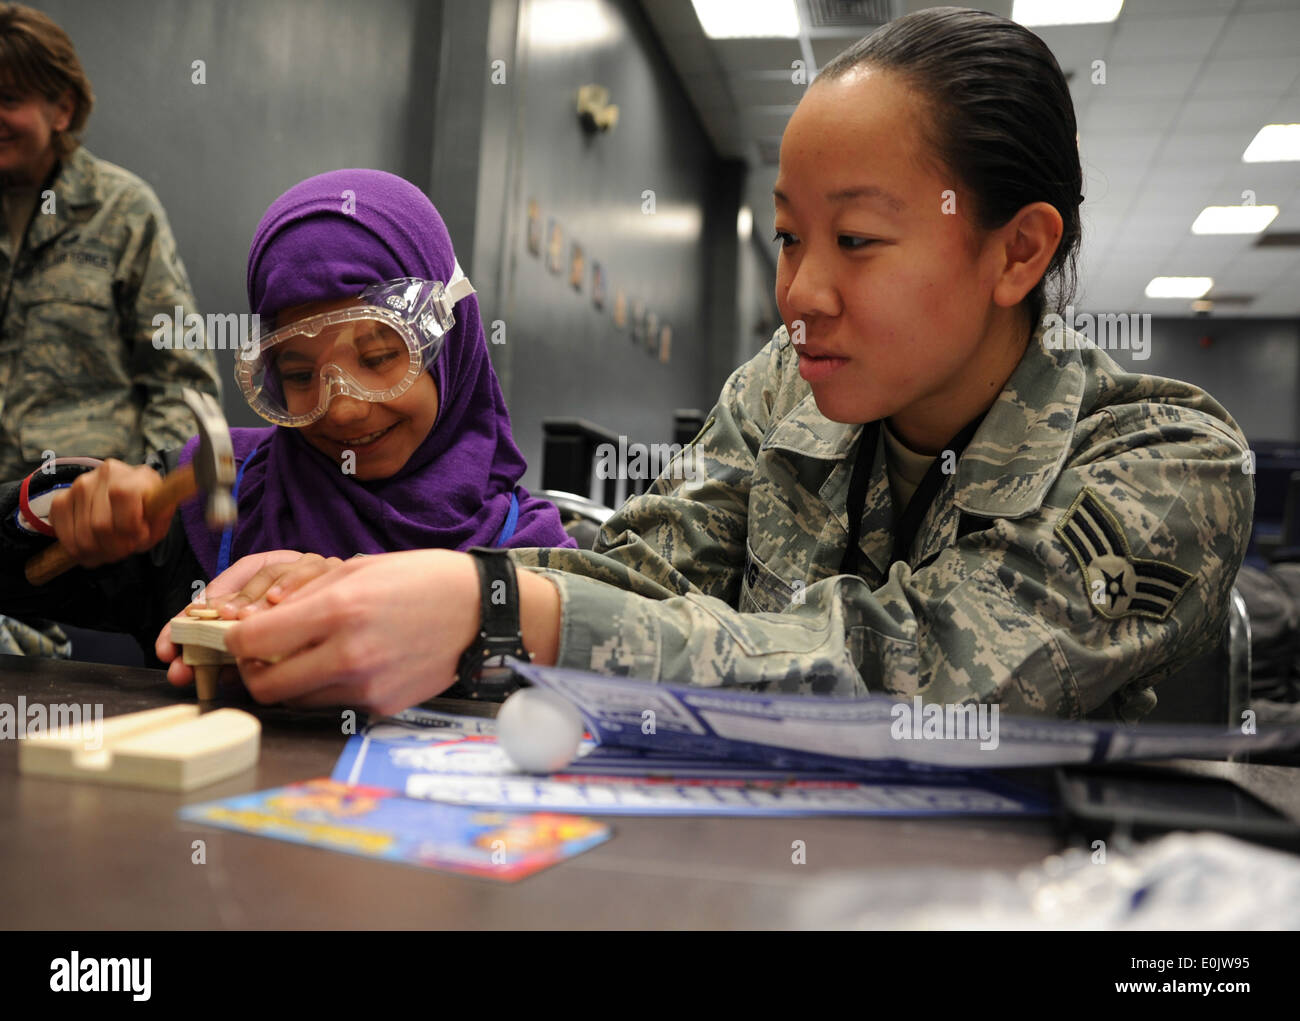 JOINT BASE BALAD, Iraq- - Senior Airman Katie King, Combined Joint Special Operations Task Force, builds a mock baseball diamon Stock Photo